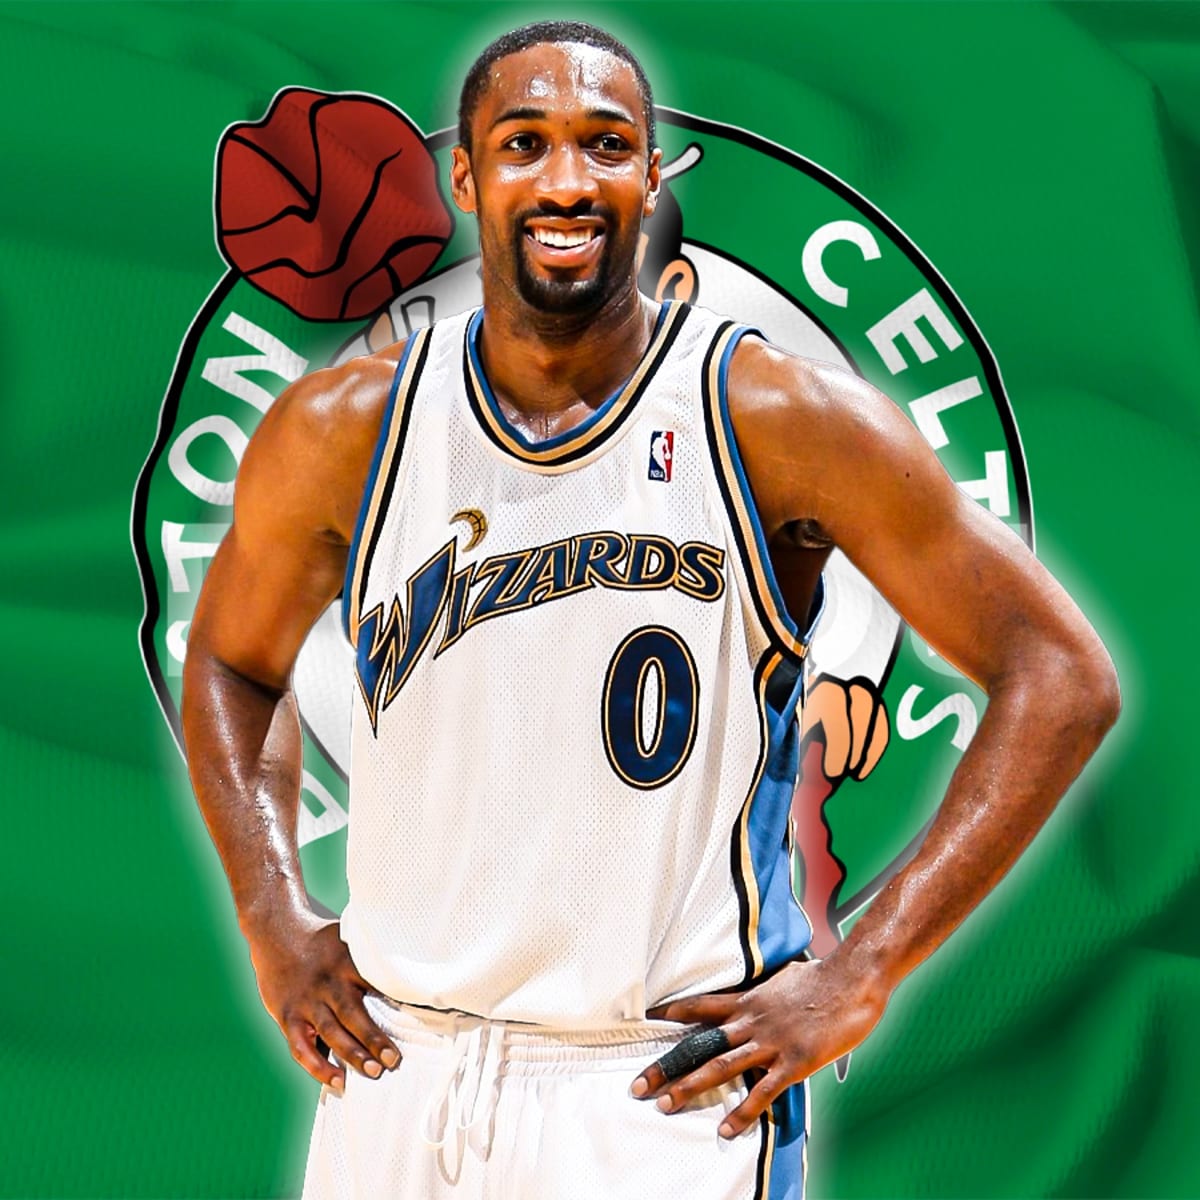 Gilbert Arenas shares his fearless mindset about the game